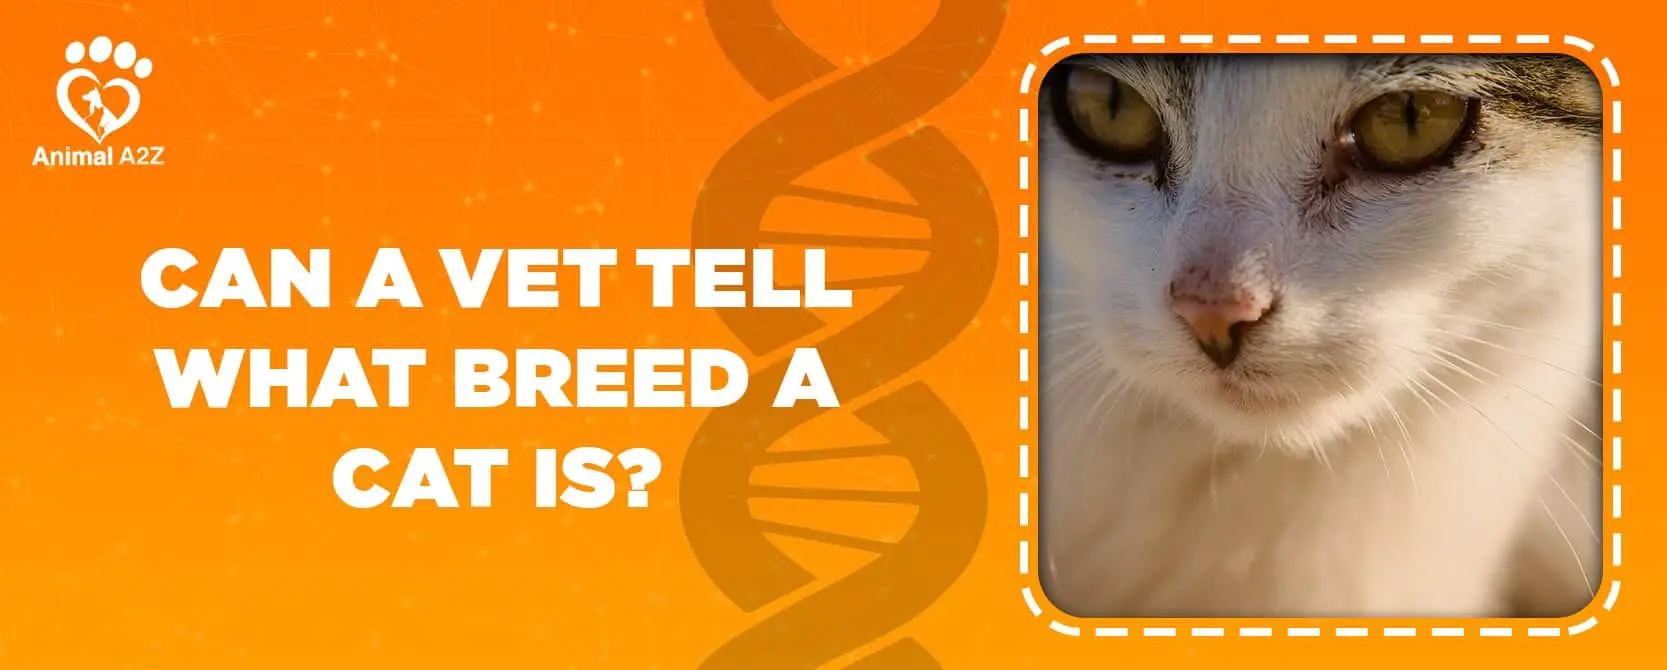 Can a vet tell what breed a cat is?